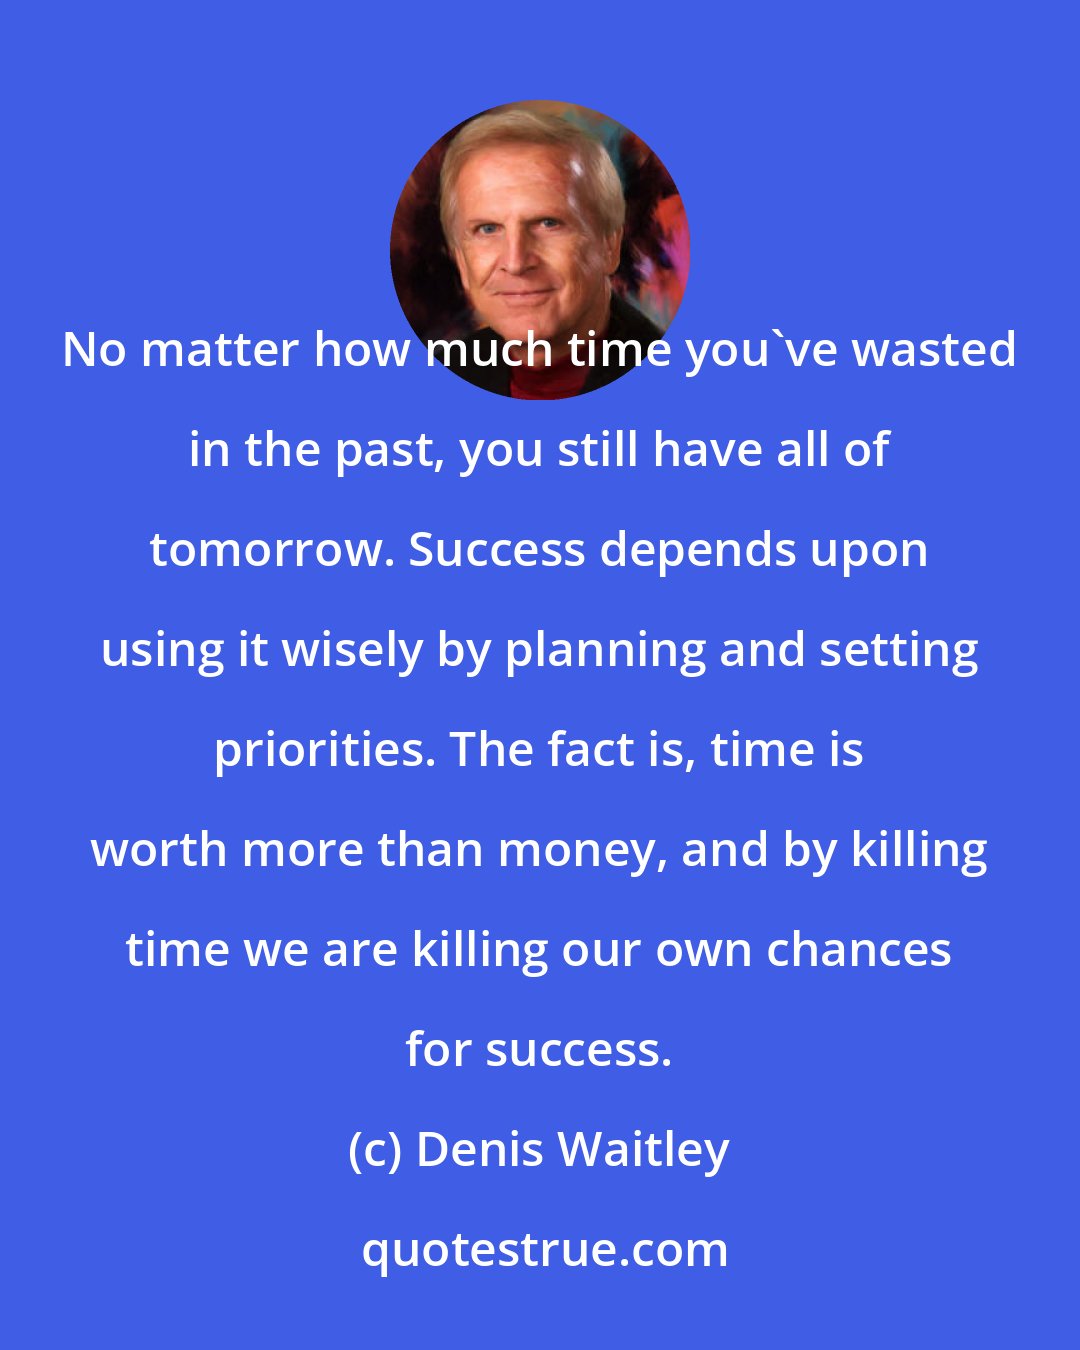 Denis Waitley: No matter how much time you've wasted in the past, you still have all of tomorrow. Success depends upon using it wisely by planning and setting priorities. The fact is, time is worth more than money, and by killing time we are killing our own chances for success.